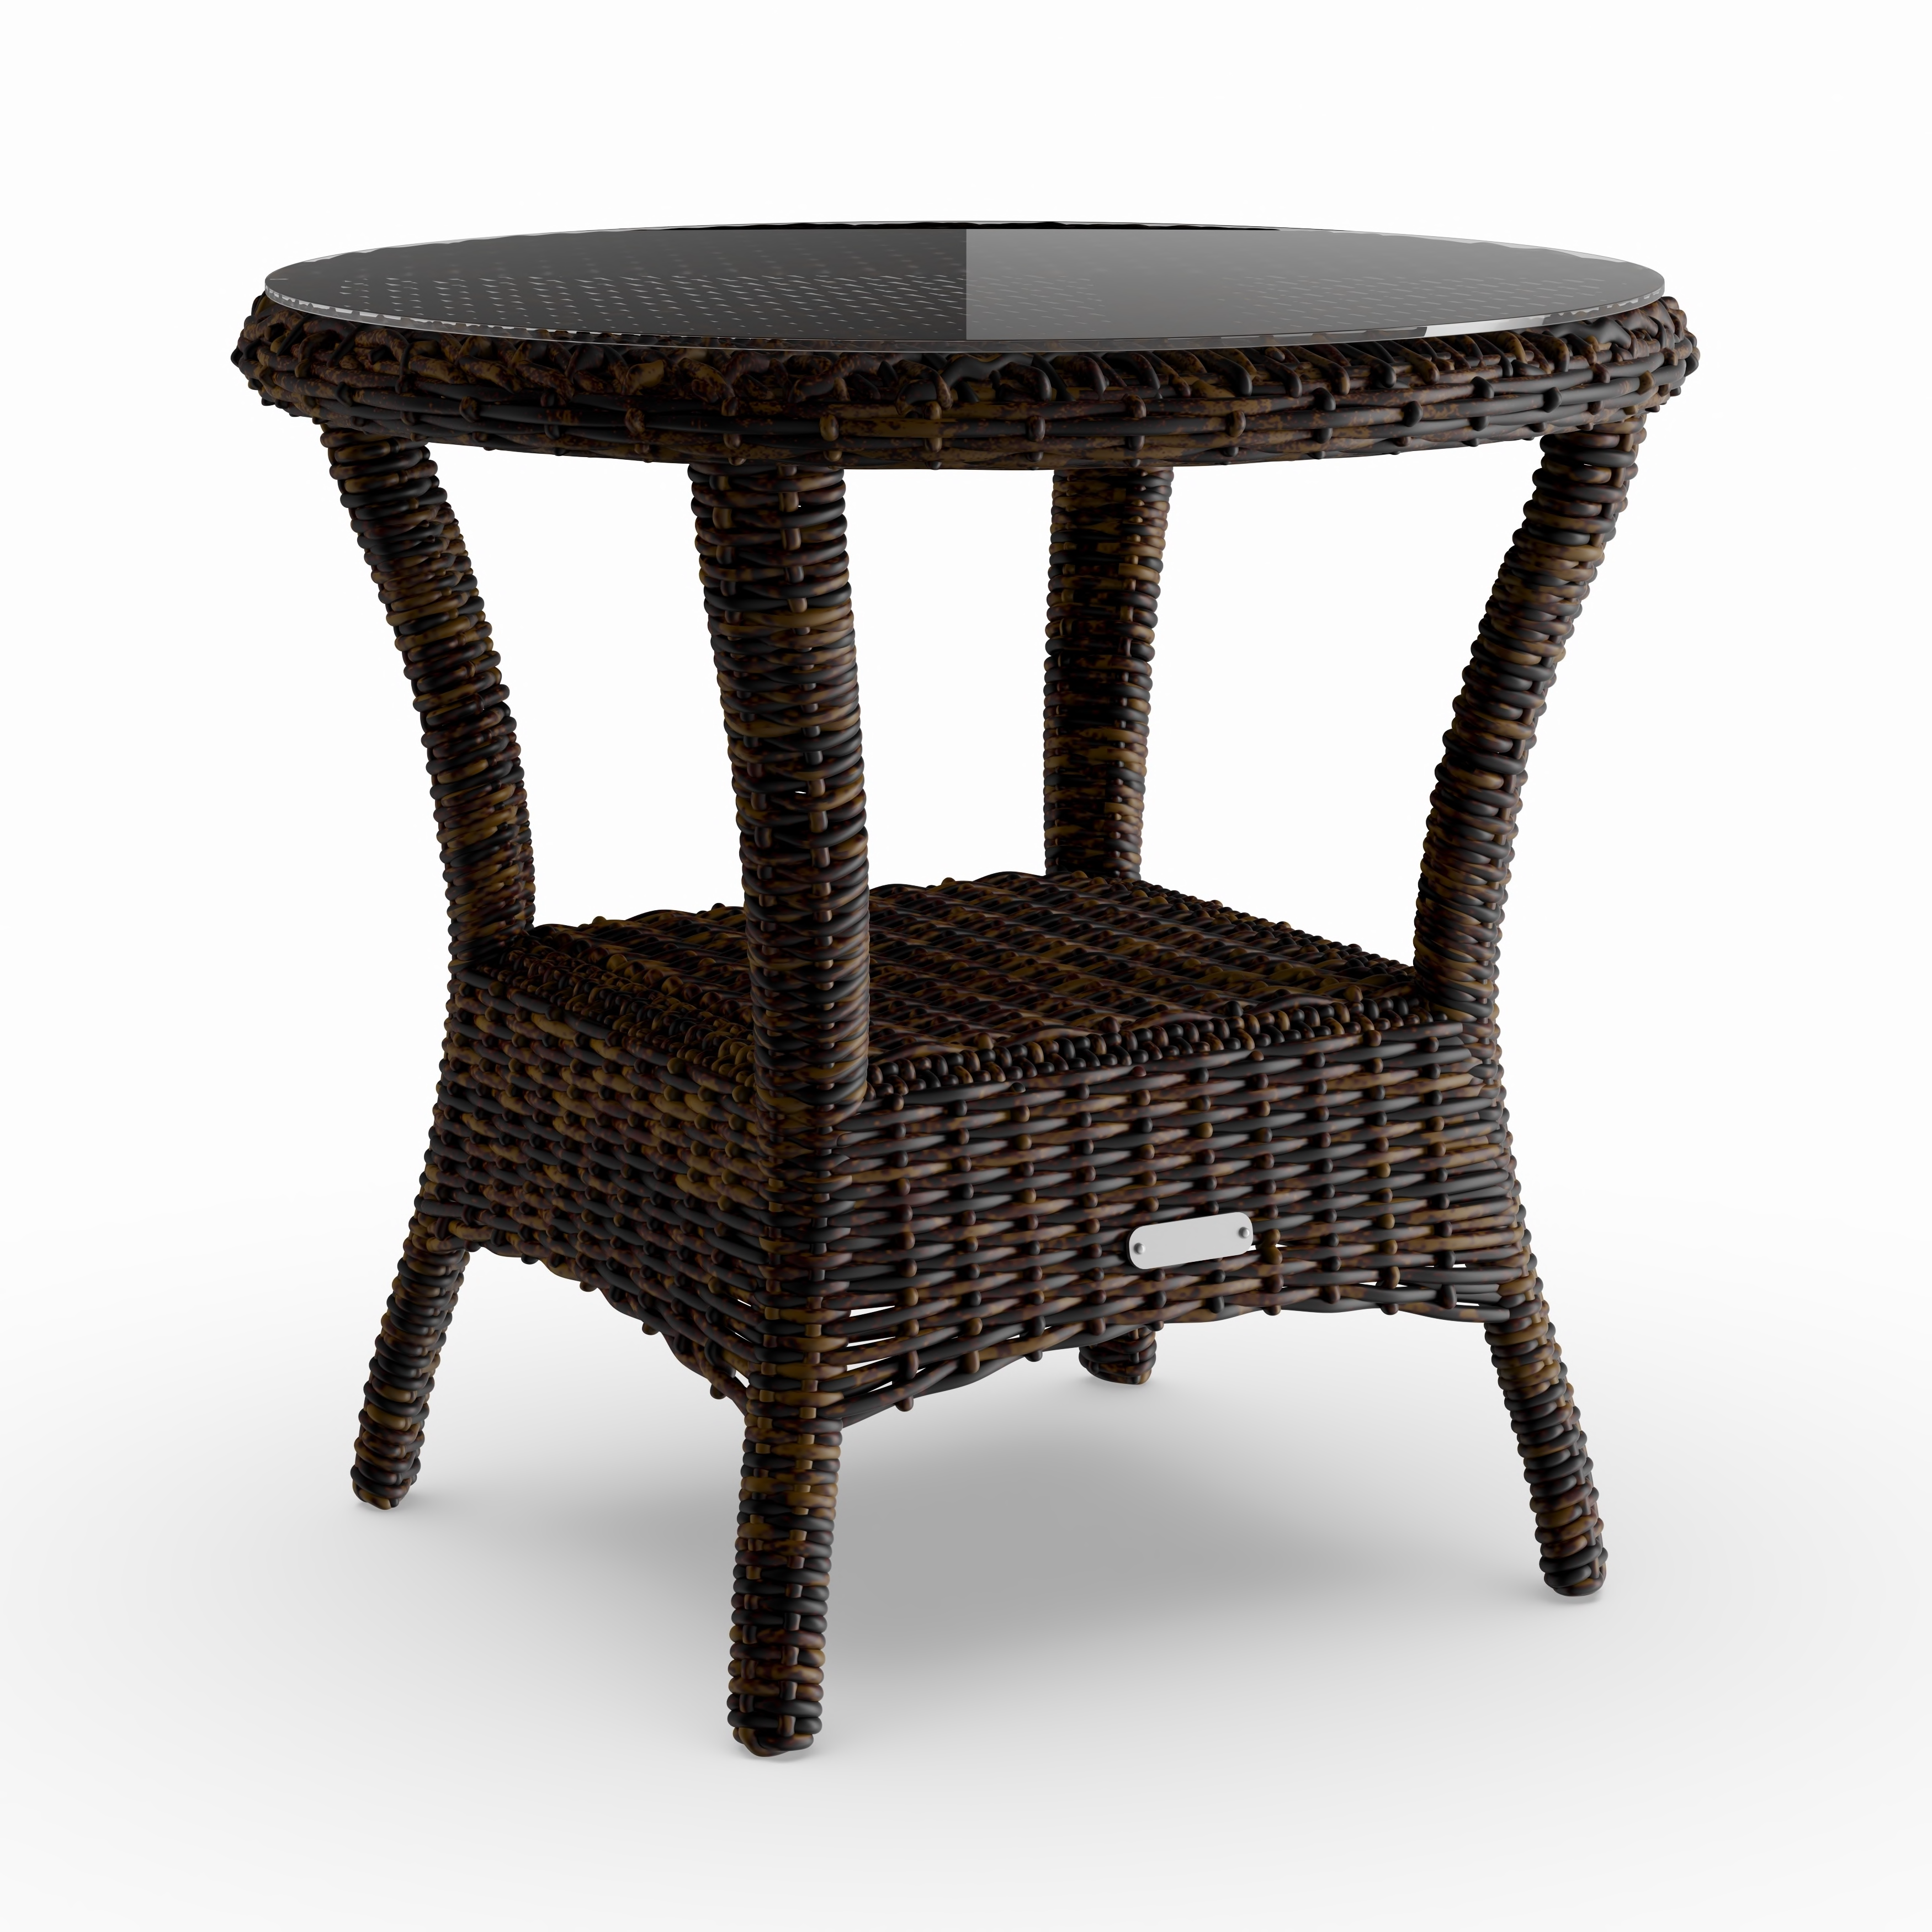 havenside home manhattan outdoor side table free shipping oliver james jack and chairs today mirrored chest mosaic set cherry small marble top coastal themed lighting fixtures